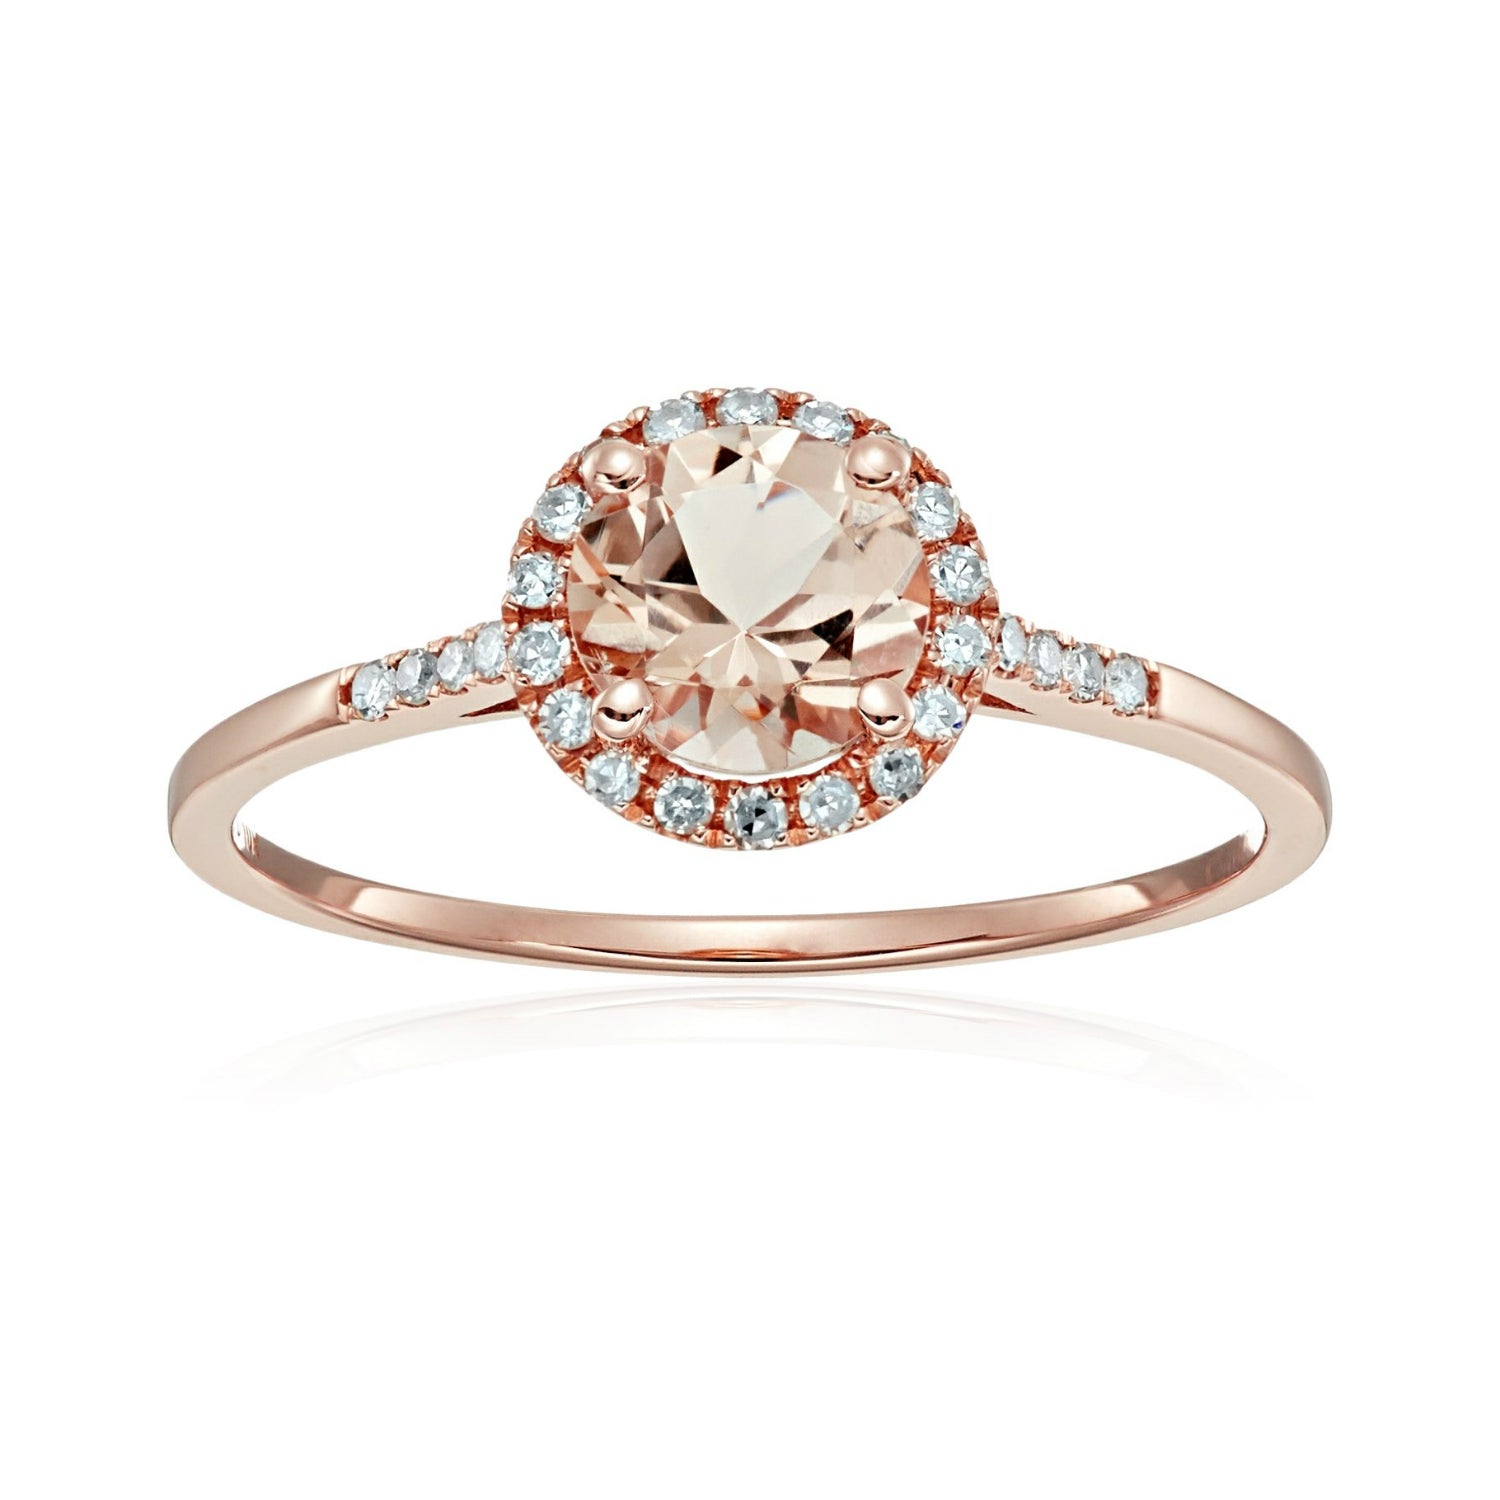 10k Rose Gold Morganite And Diamond Classic Princess Di Halo Engagement Ring (1/10cttw, H-I Color, I1-I2 Clarity), - pinctore